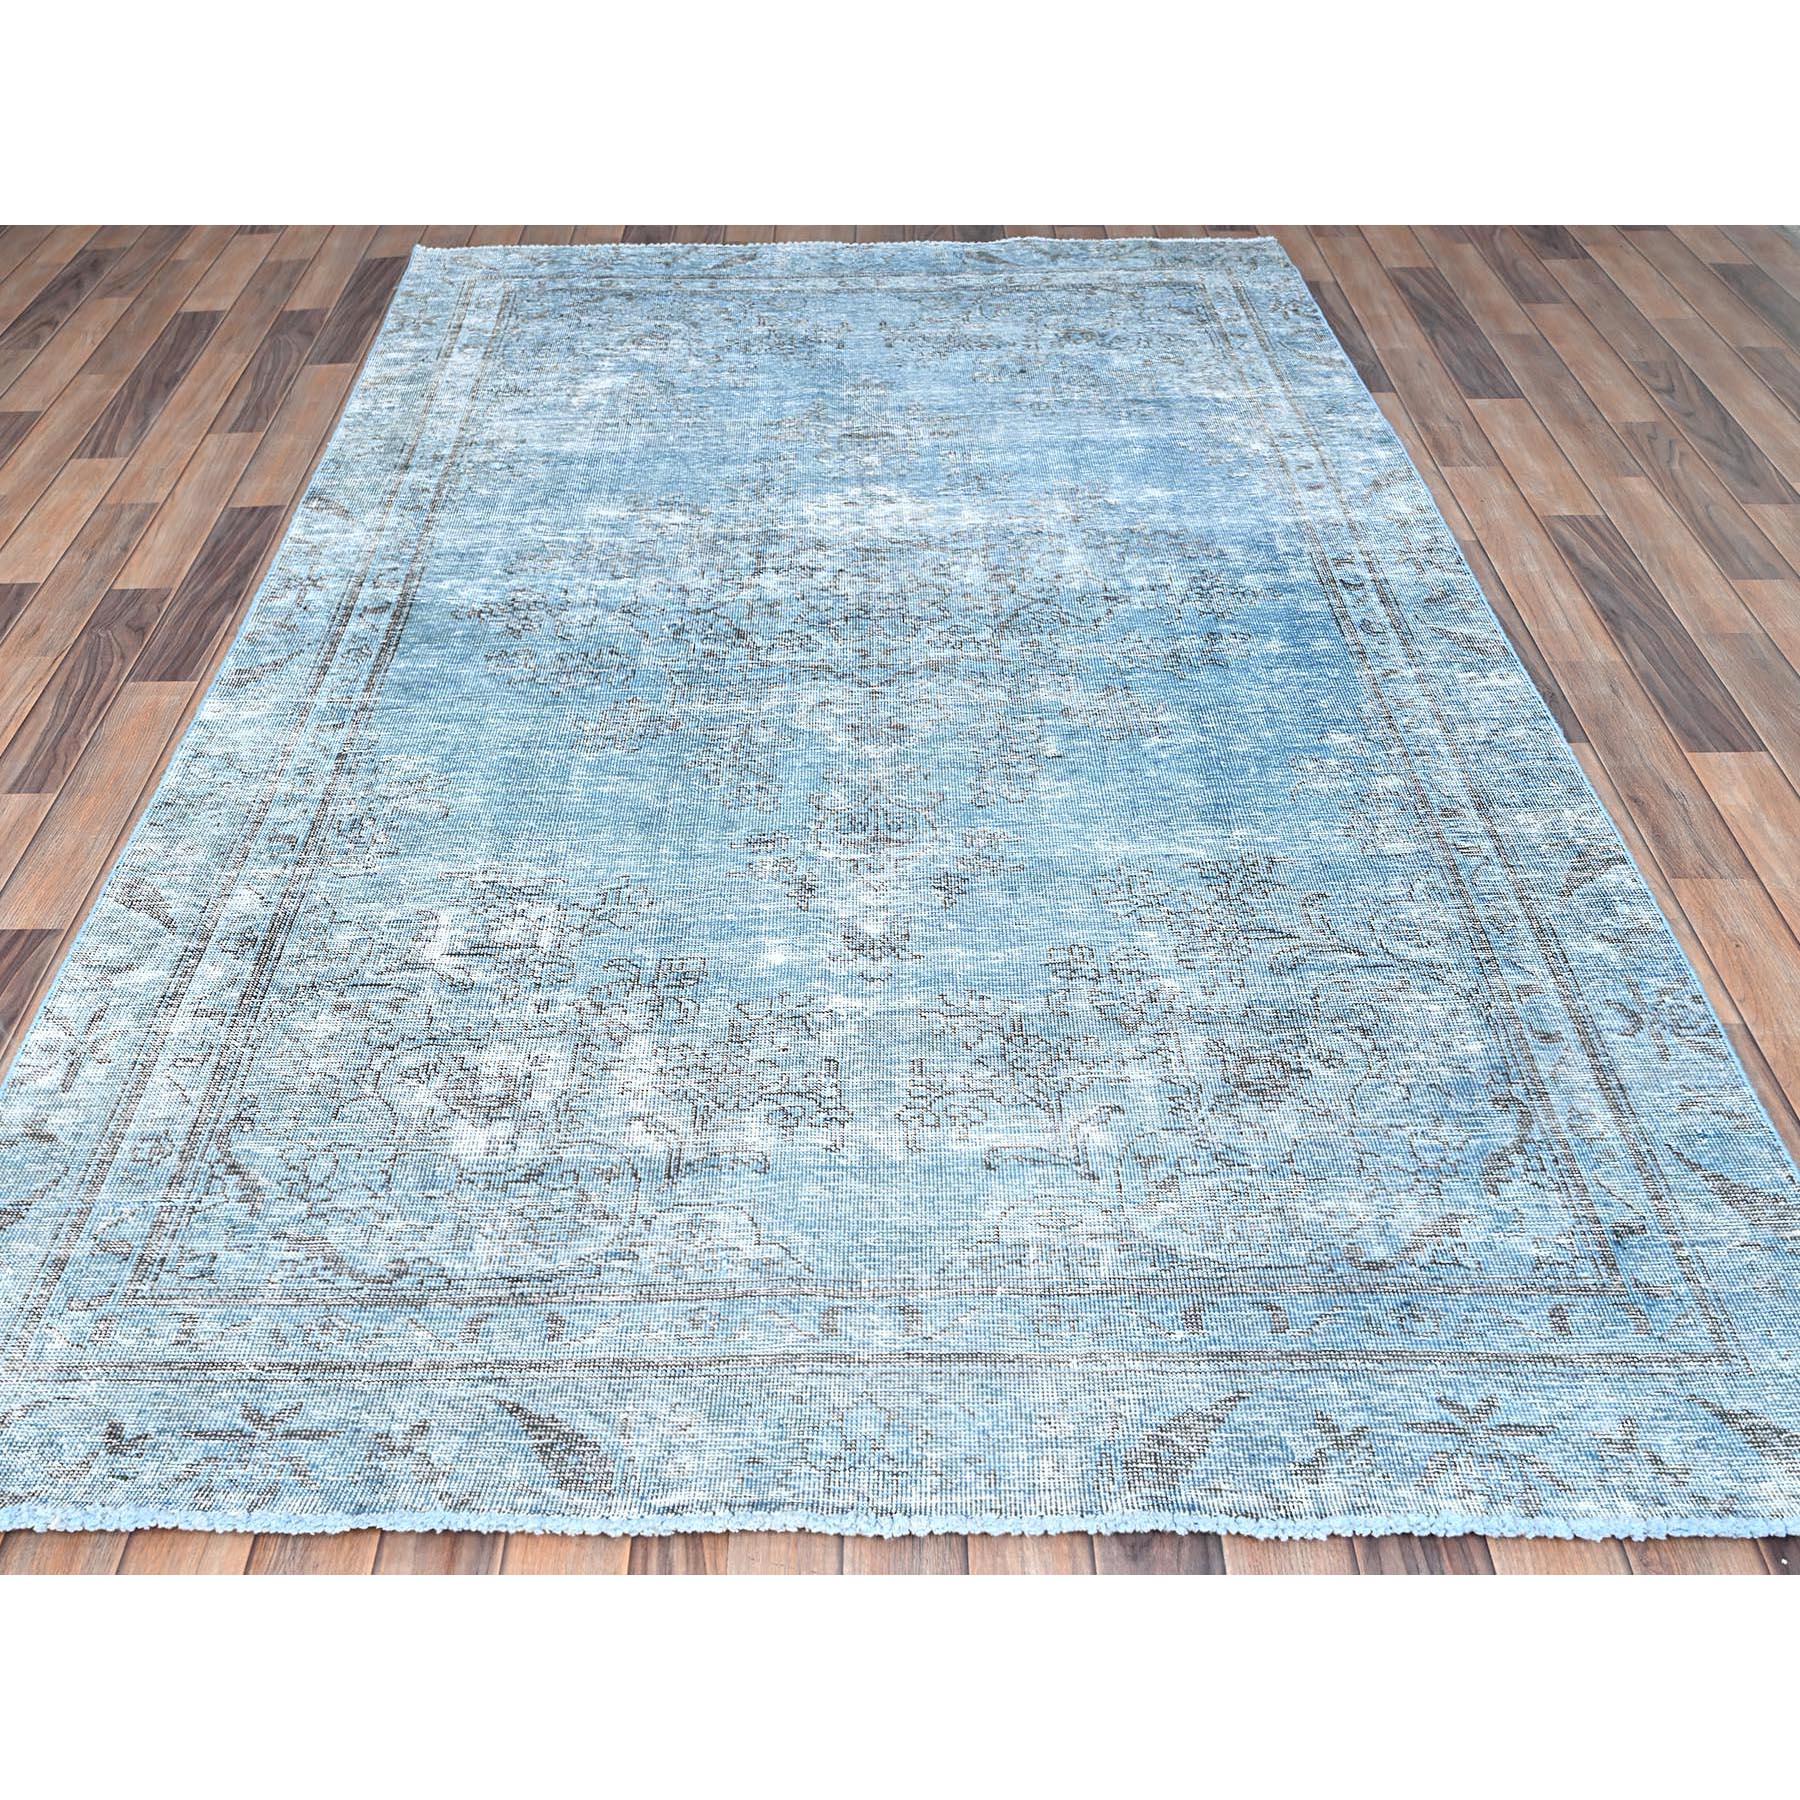 This fabulous Hand-Knotted carpet has been created and designed for extra strength and durability. This rug has been handcrafted for weeks in the traditional method that is used to make
Exact Rug Size in Feet and Inches : 5'5